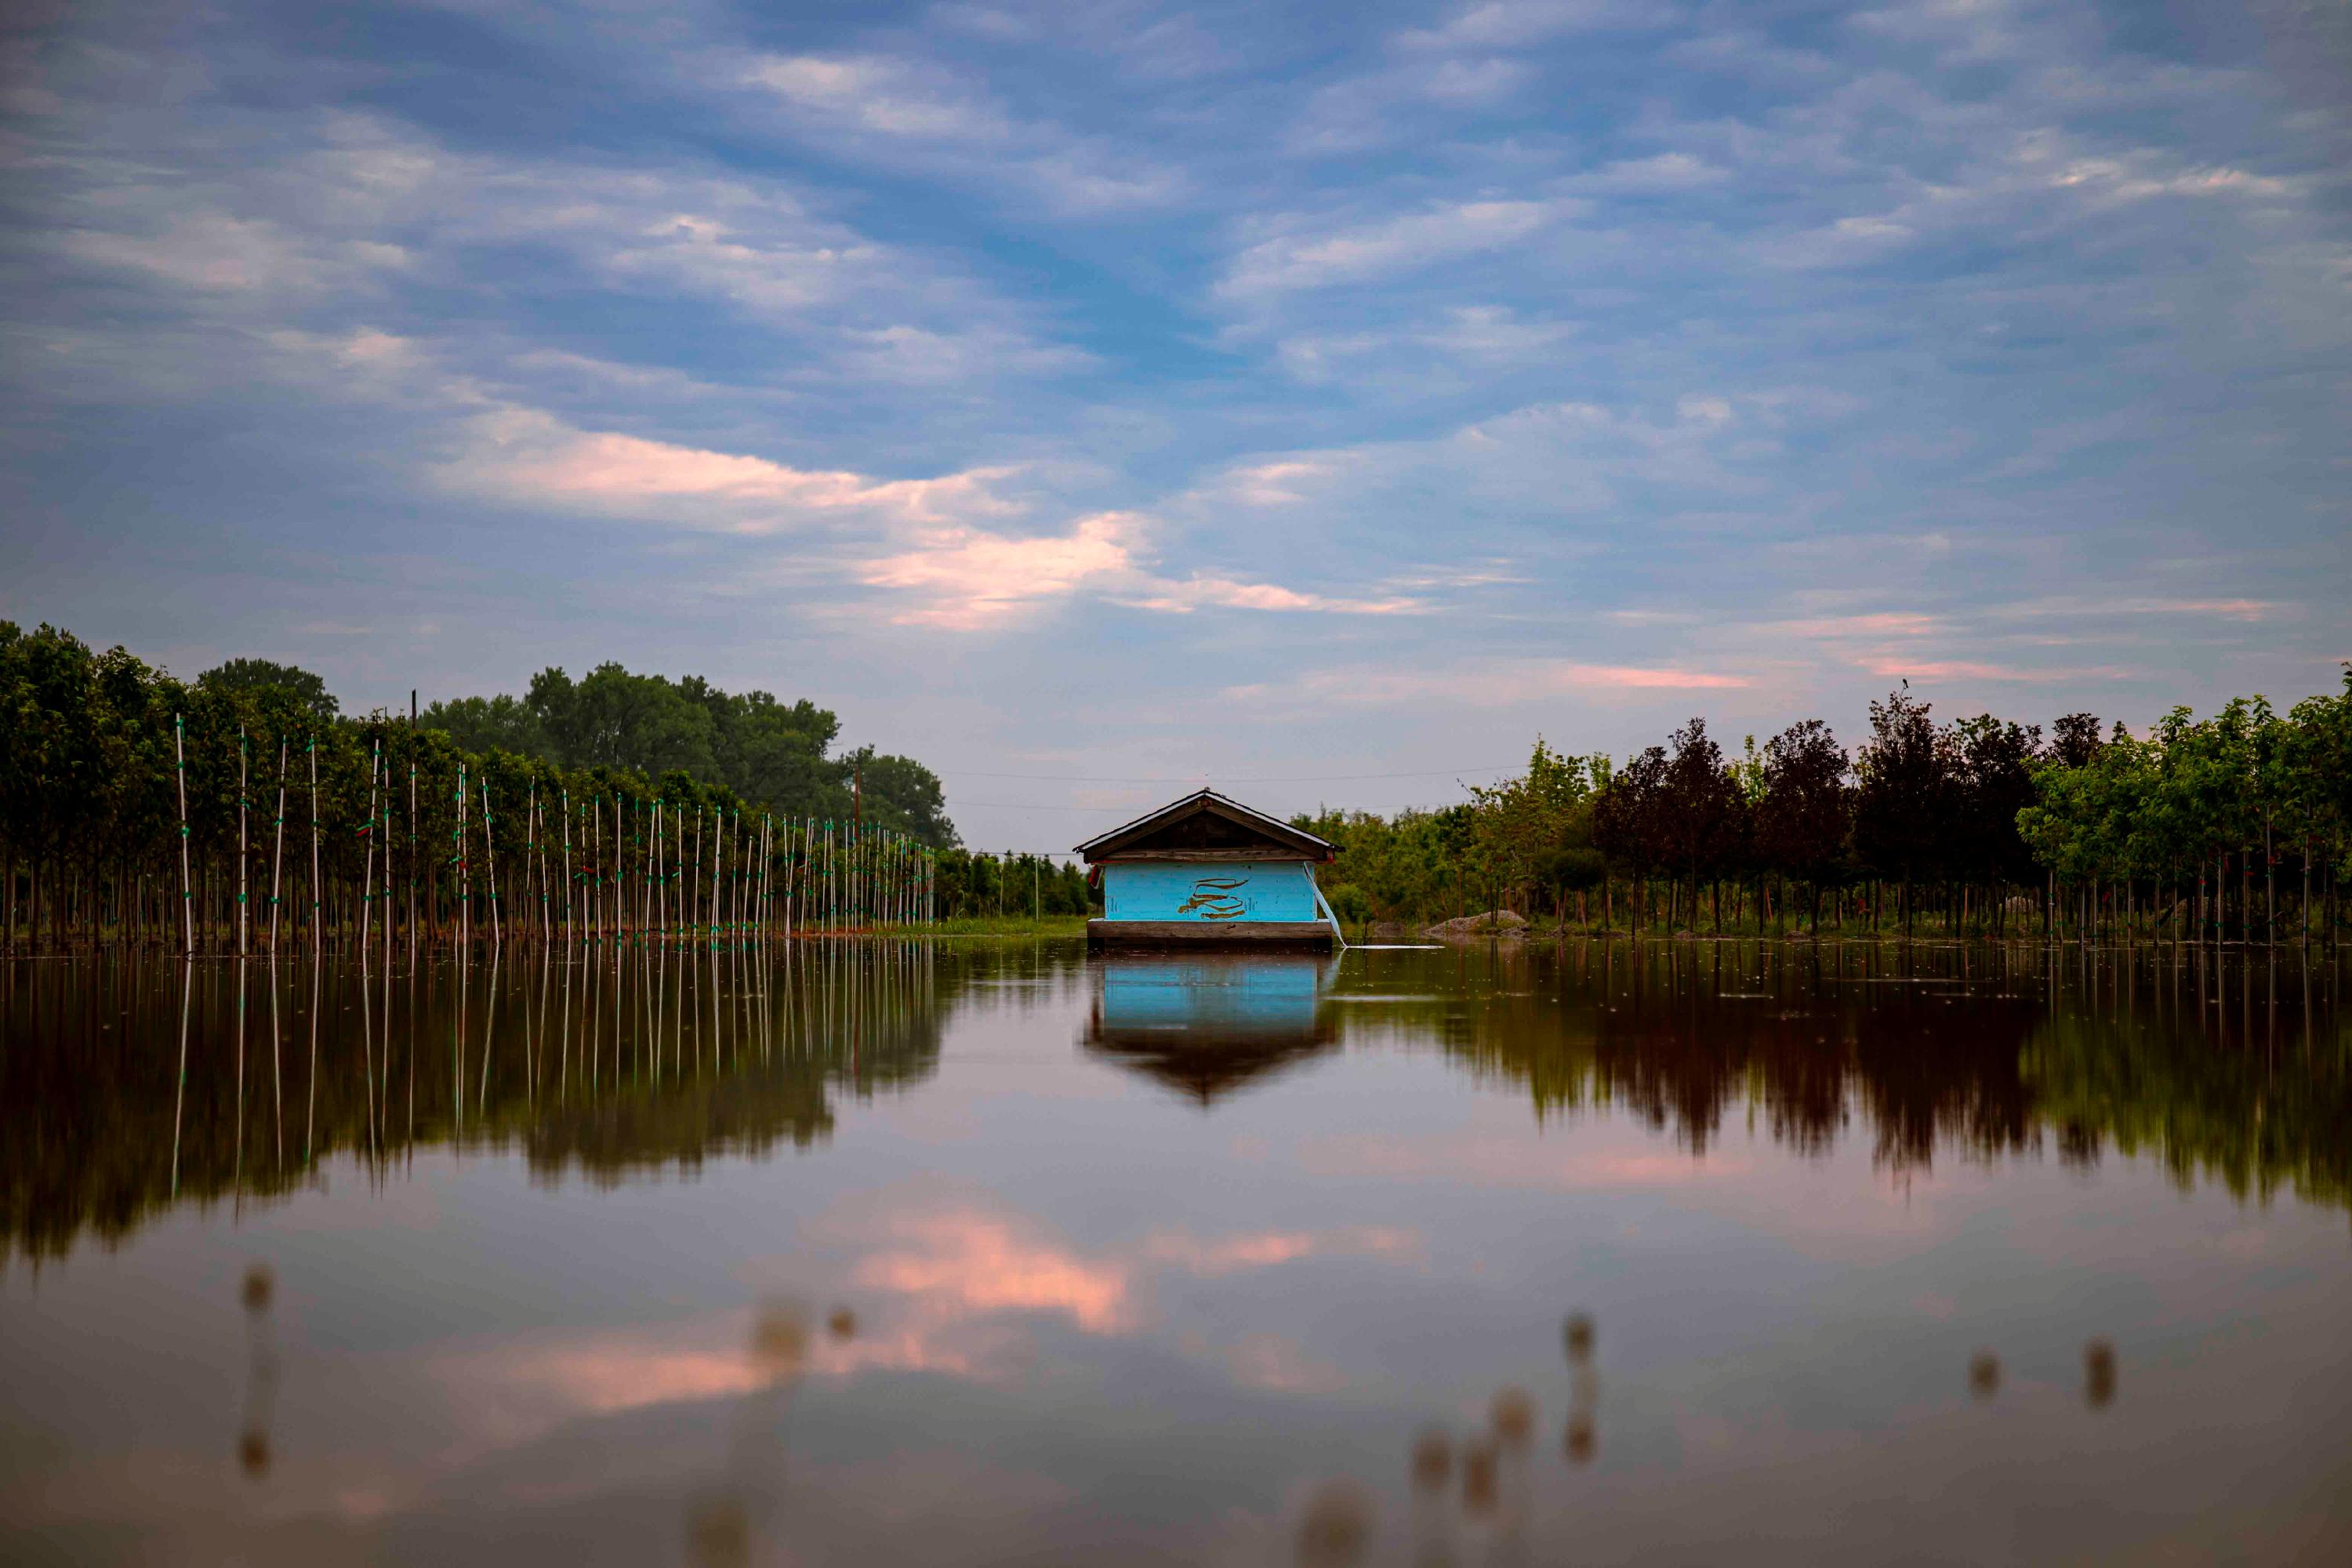 A shed in a flooded tree farm is photographed, with a cloudy sky in sunset reflected against the flood water